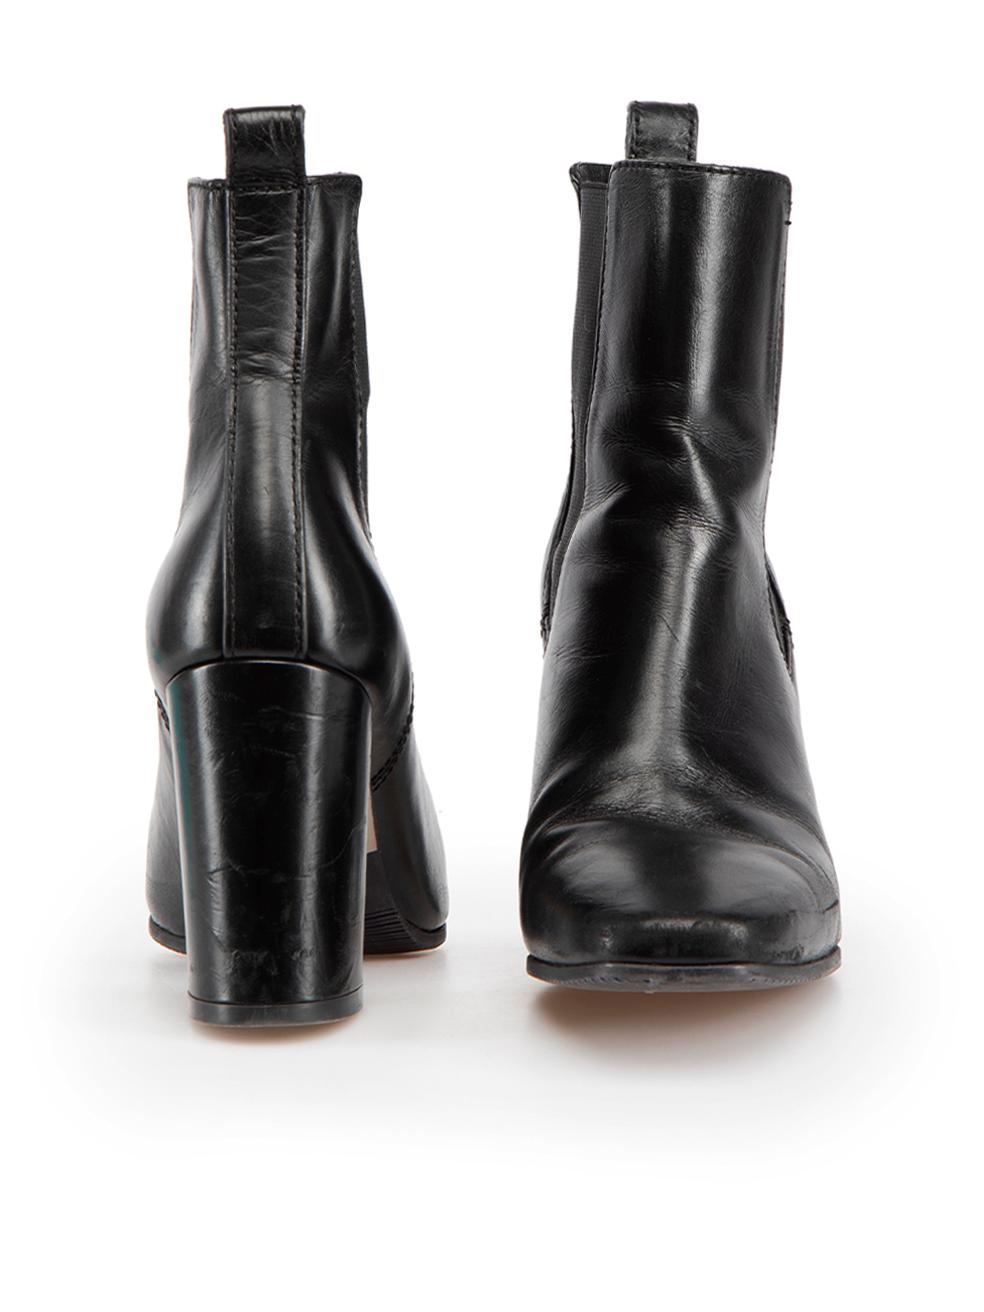 Stuart Weitzman Black Leather High Heeled Boots Size US 6 In Good Condition For Sale In London, GB